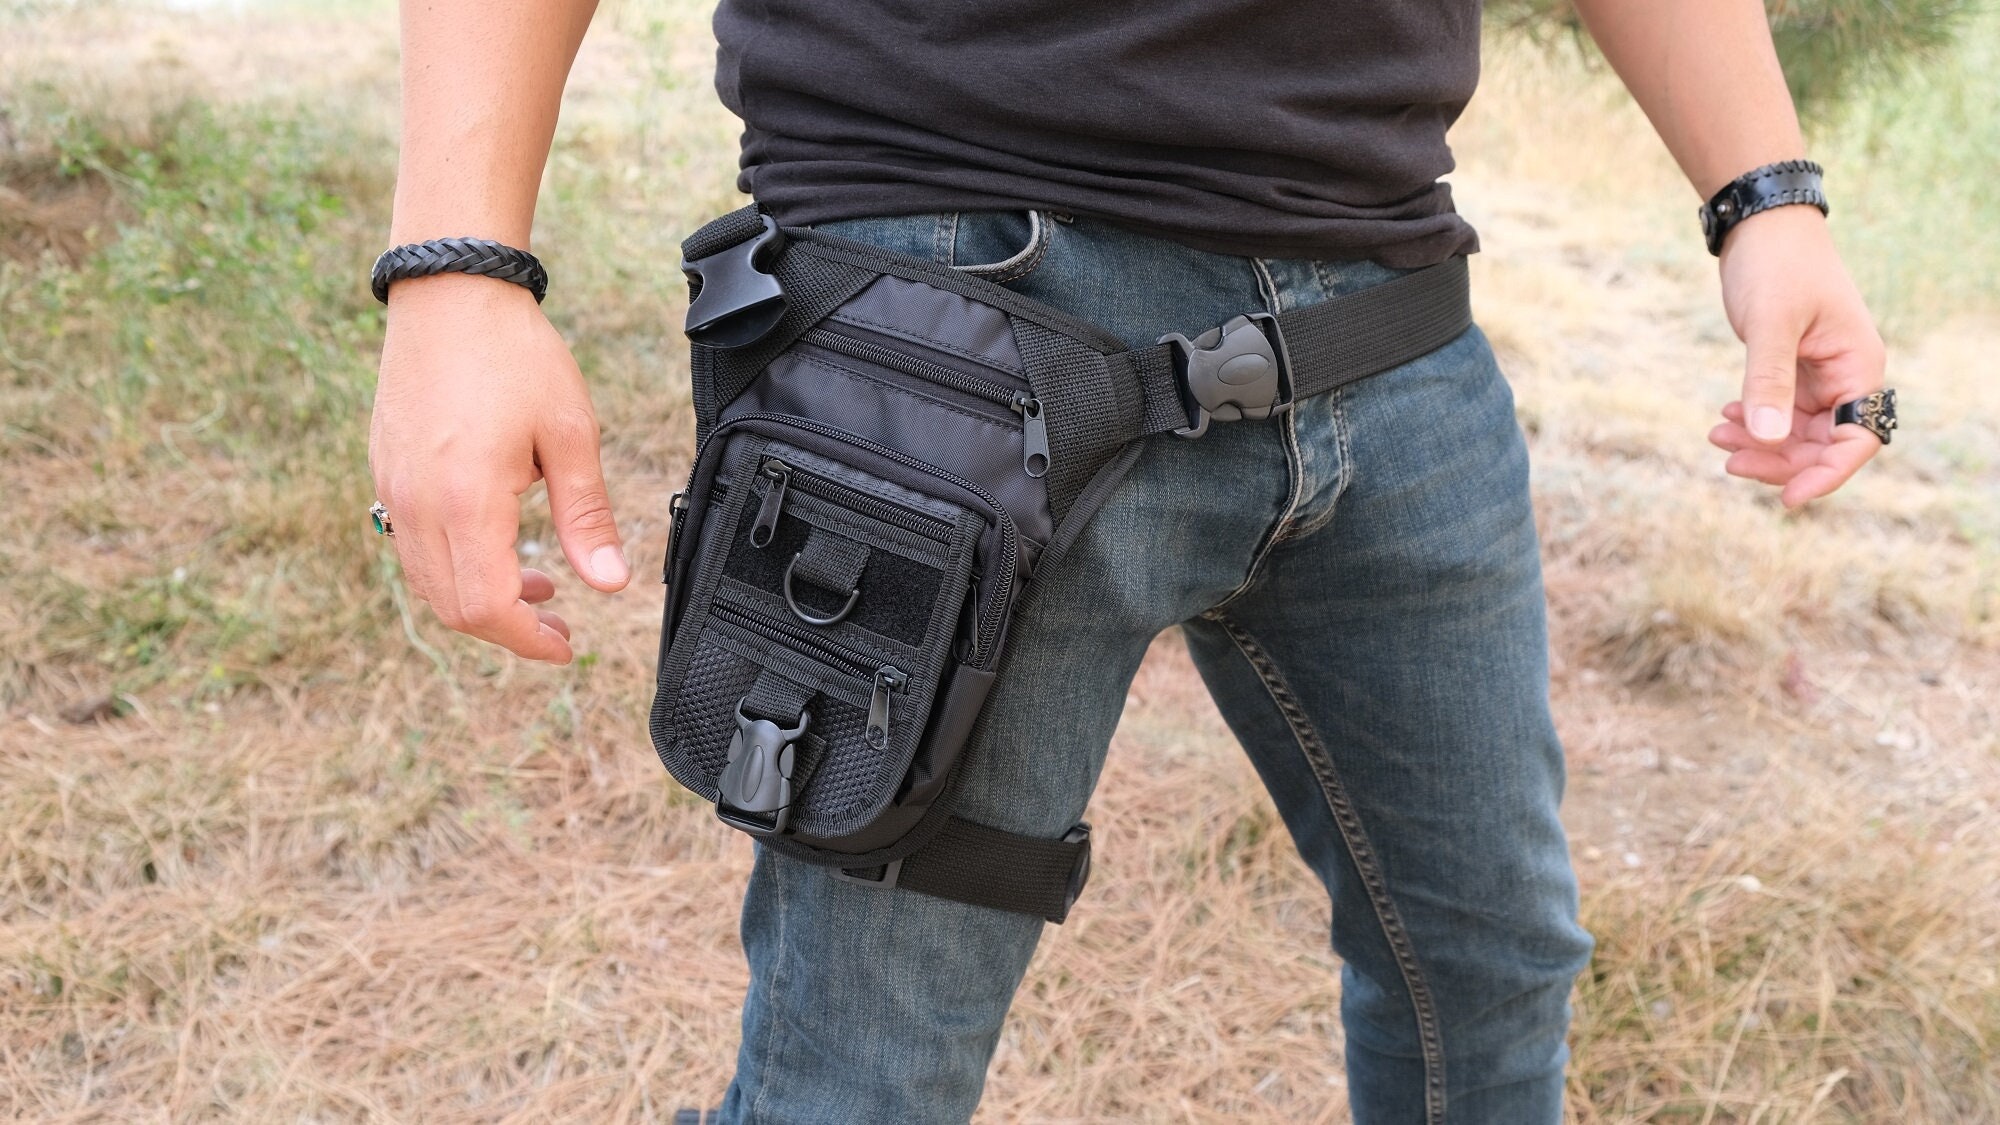 Tactical Triangle Pistol Bag Fanny Pack Utility Bag Drop - Etsy